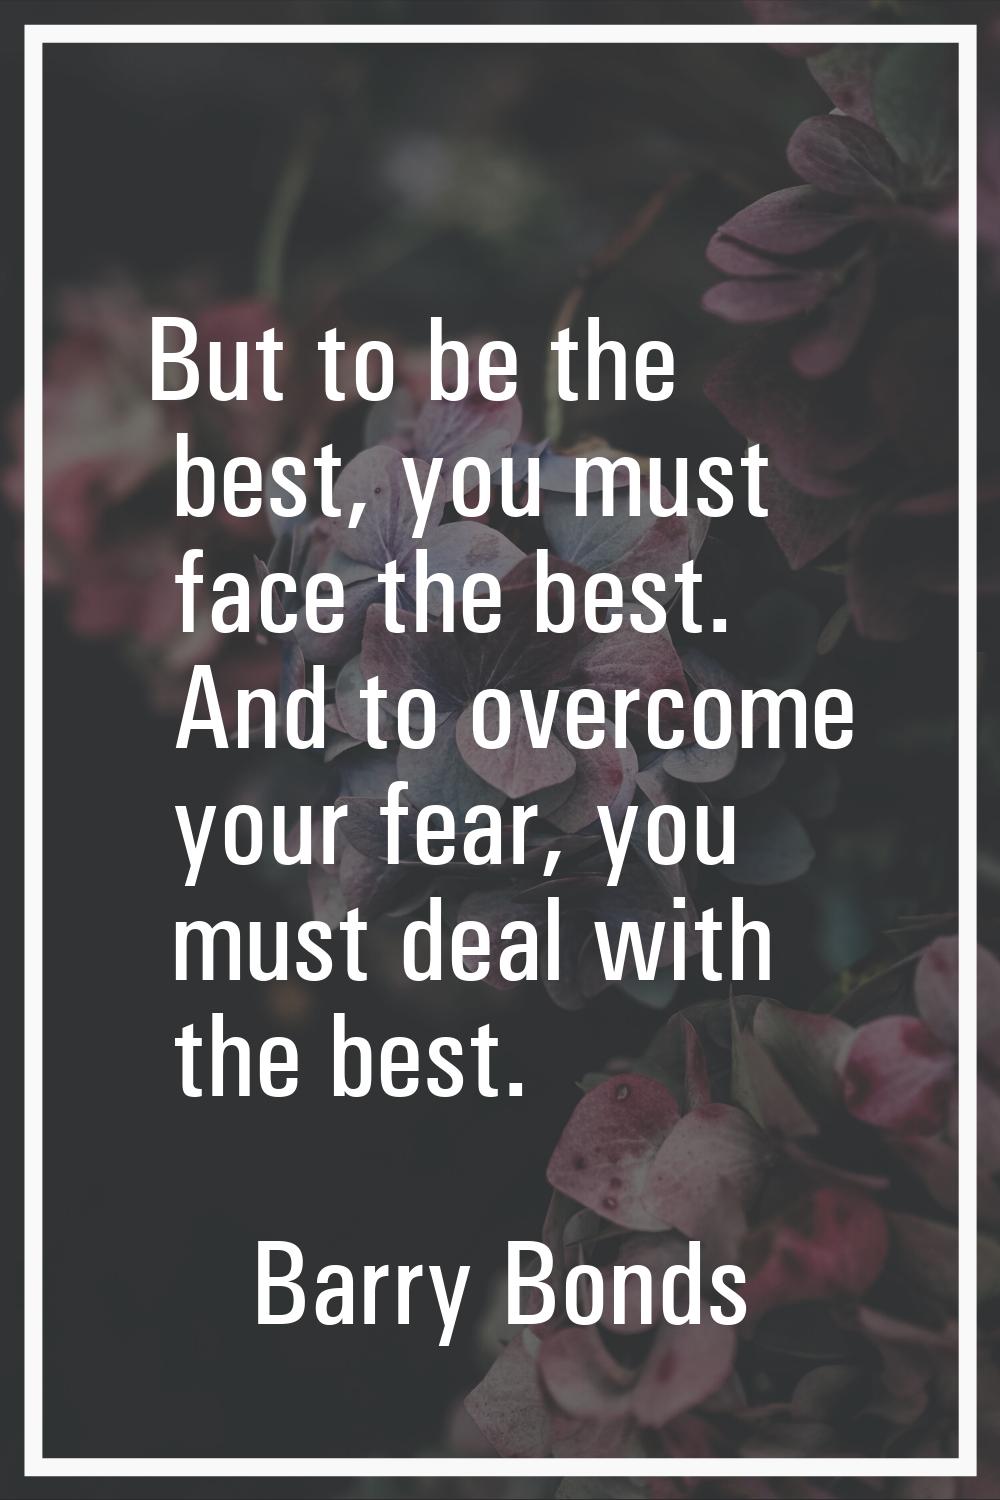 But to be the best, you must face the best. And to overcome your fear, you must deal with the best.